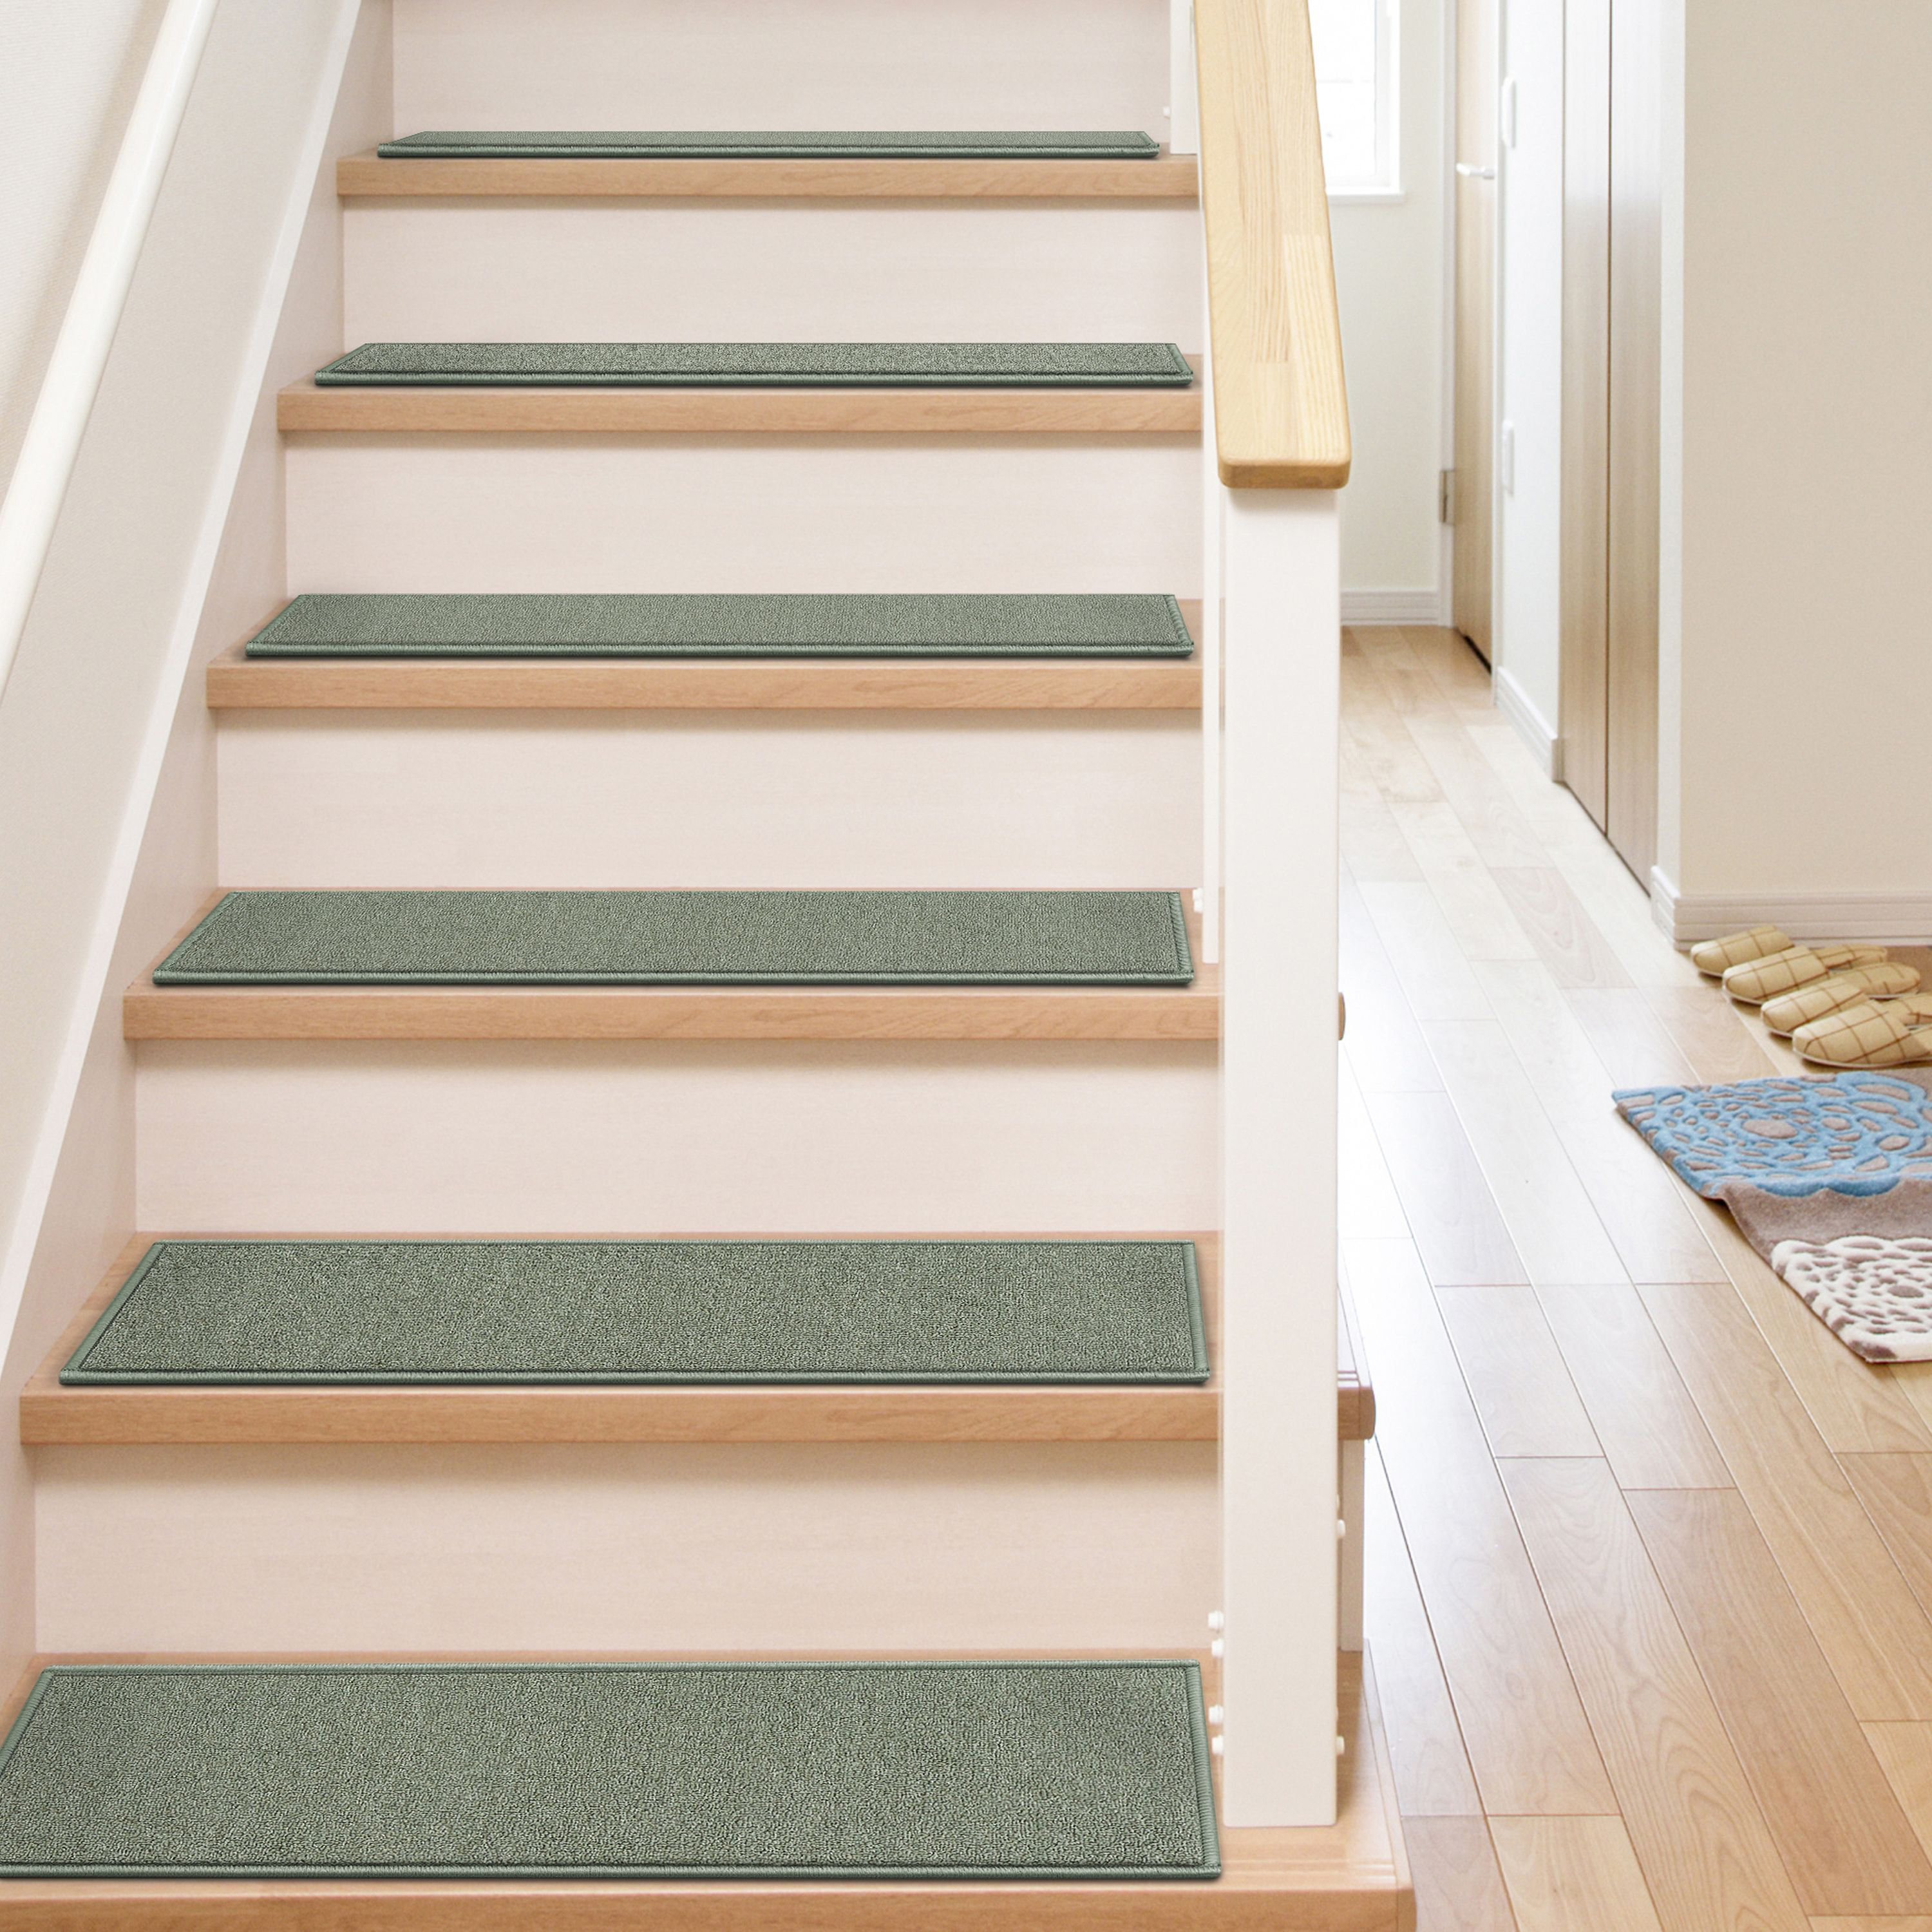 Sets of 4 Nonslip Stair Treads Blue Sage Burgundy Sand Safety Stair Rugs Carpet 